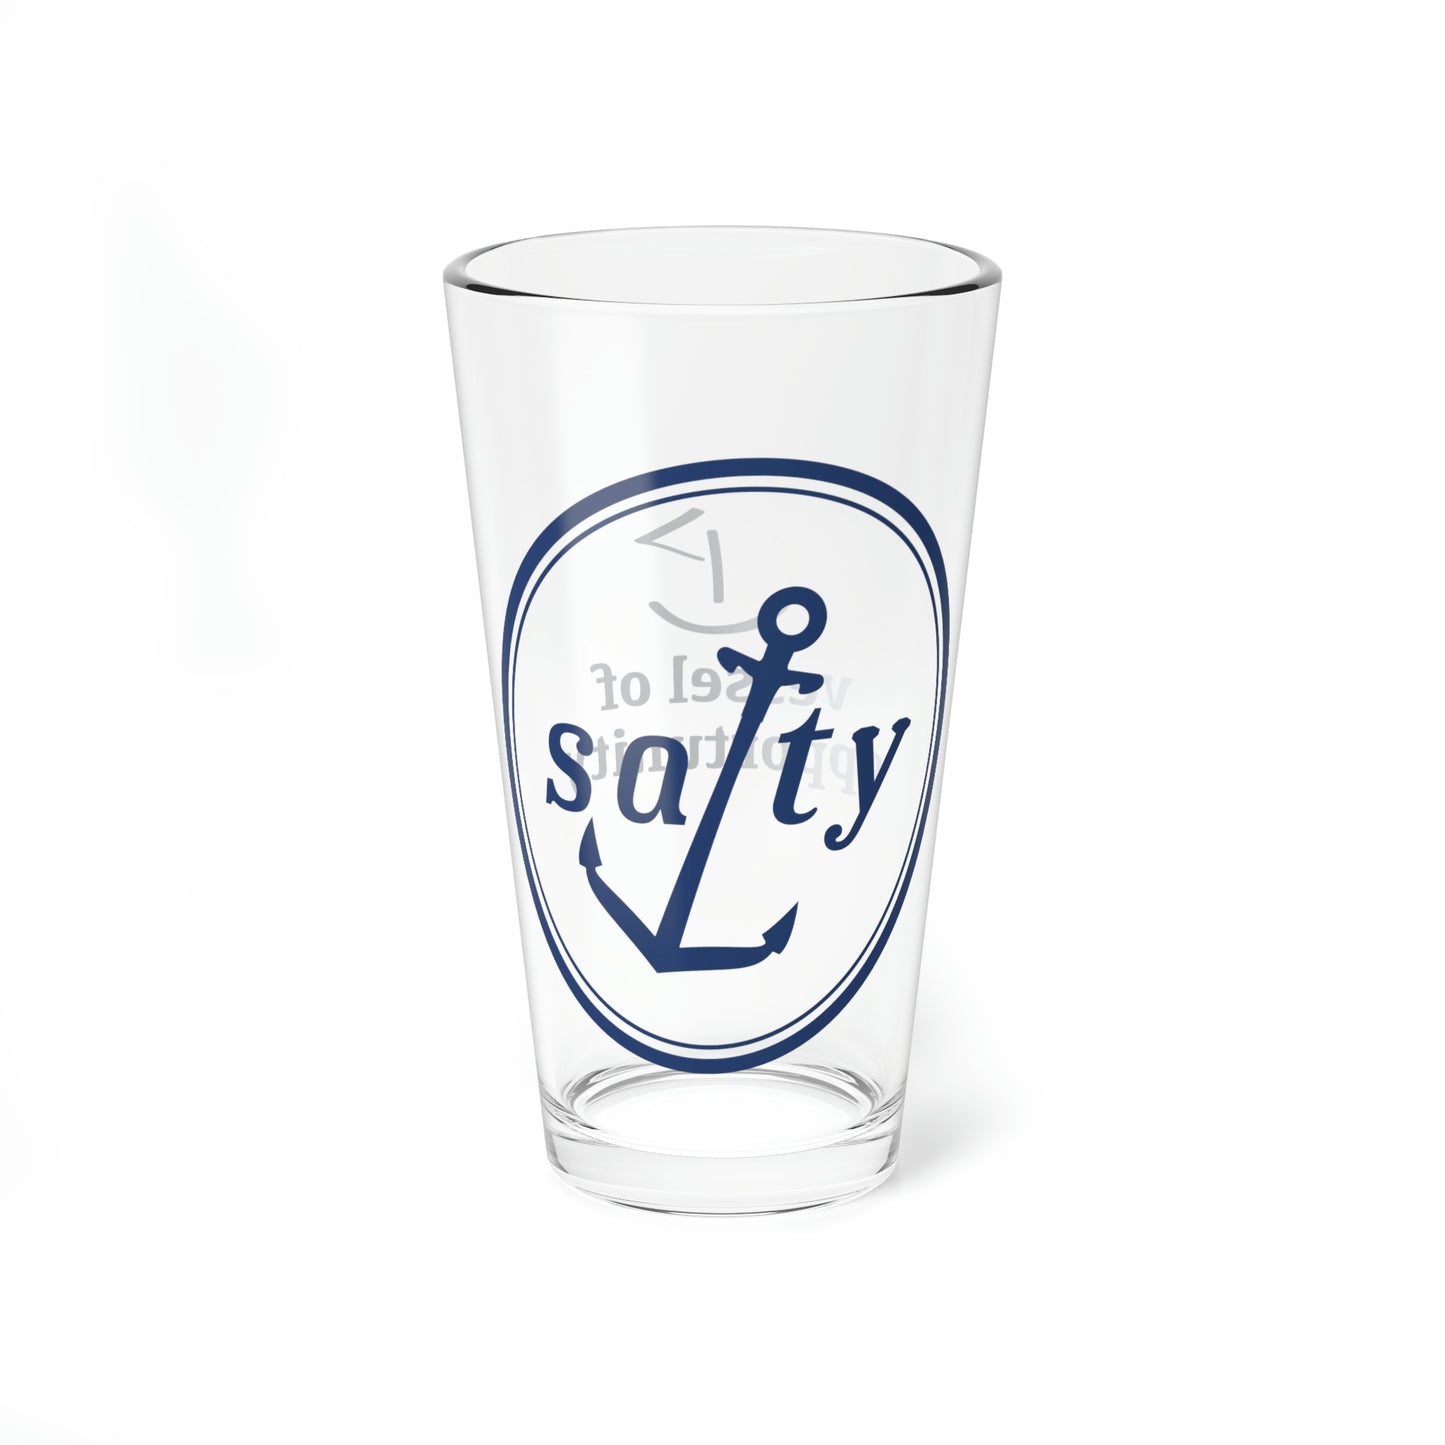 Salty™ Vessel of Opportunity Mixing/Drinking Glass, 16 oz